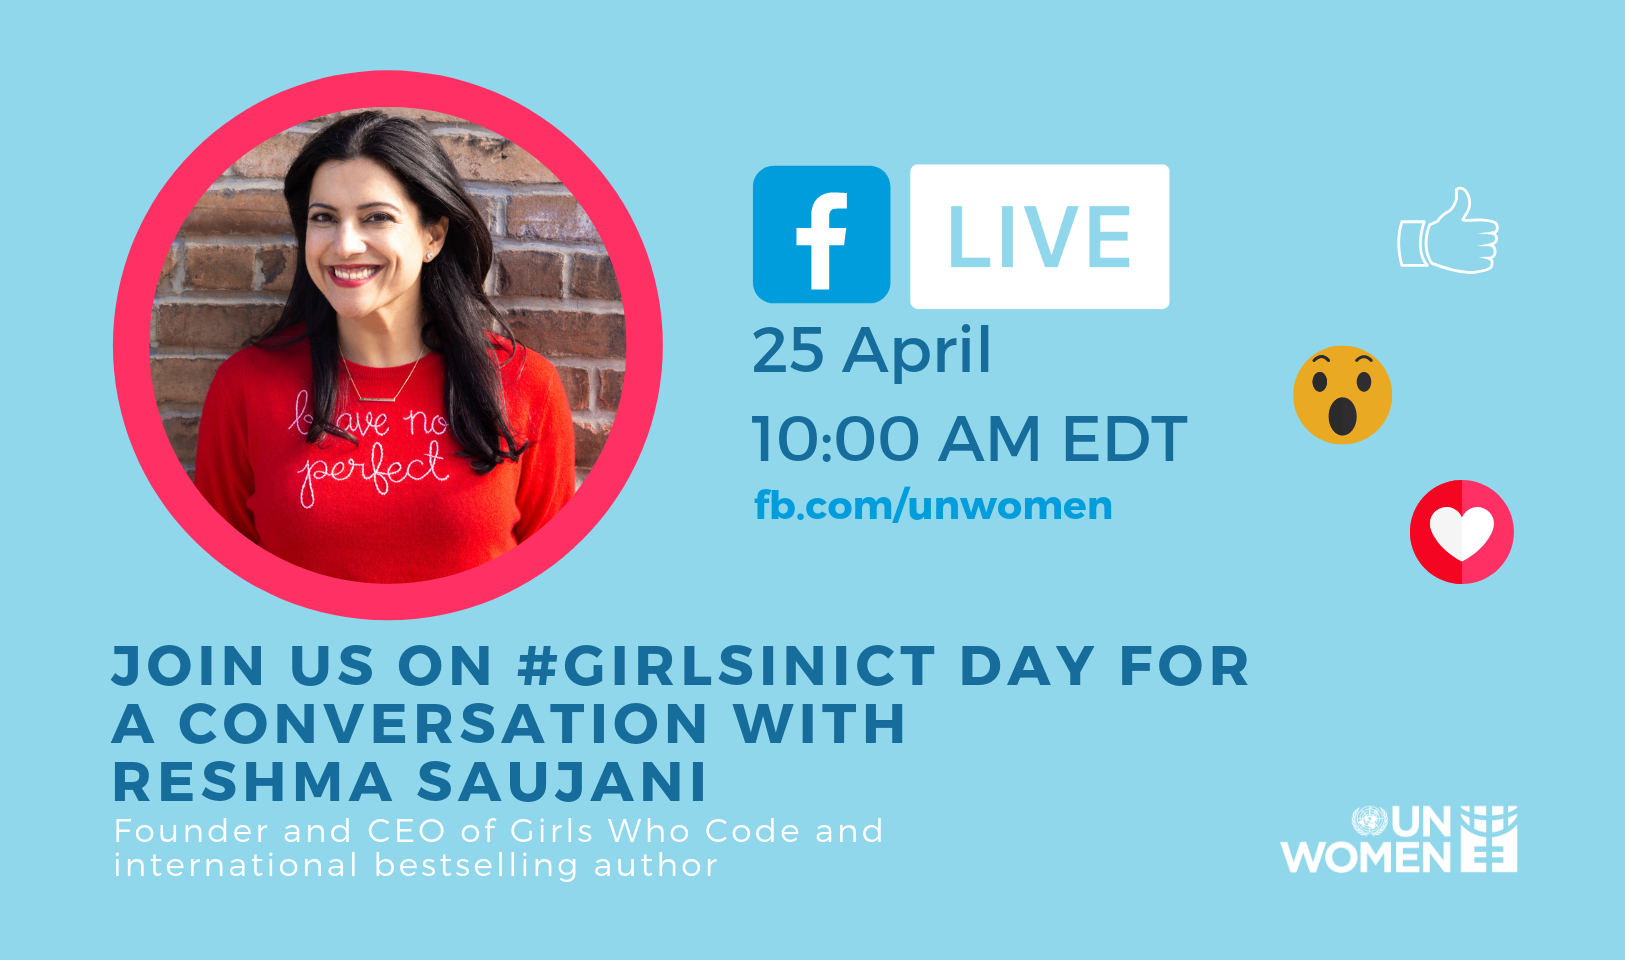 Join us on #GirlsInICT Day for a conversation with Reshma Saujani on FacebookLive